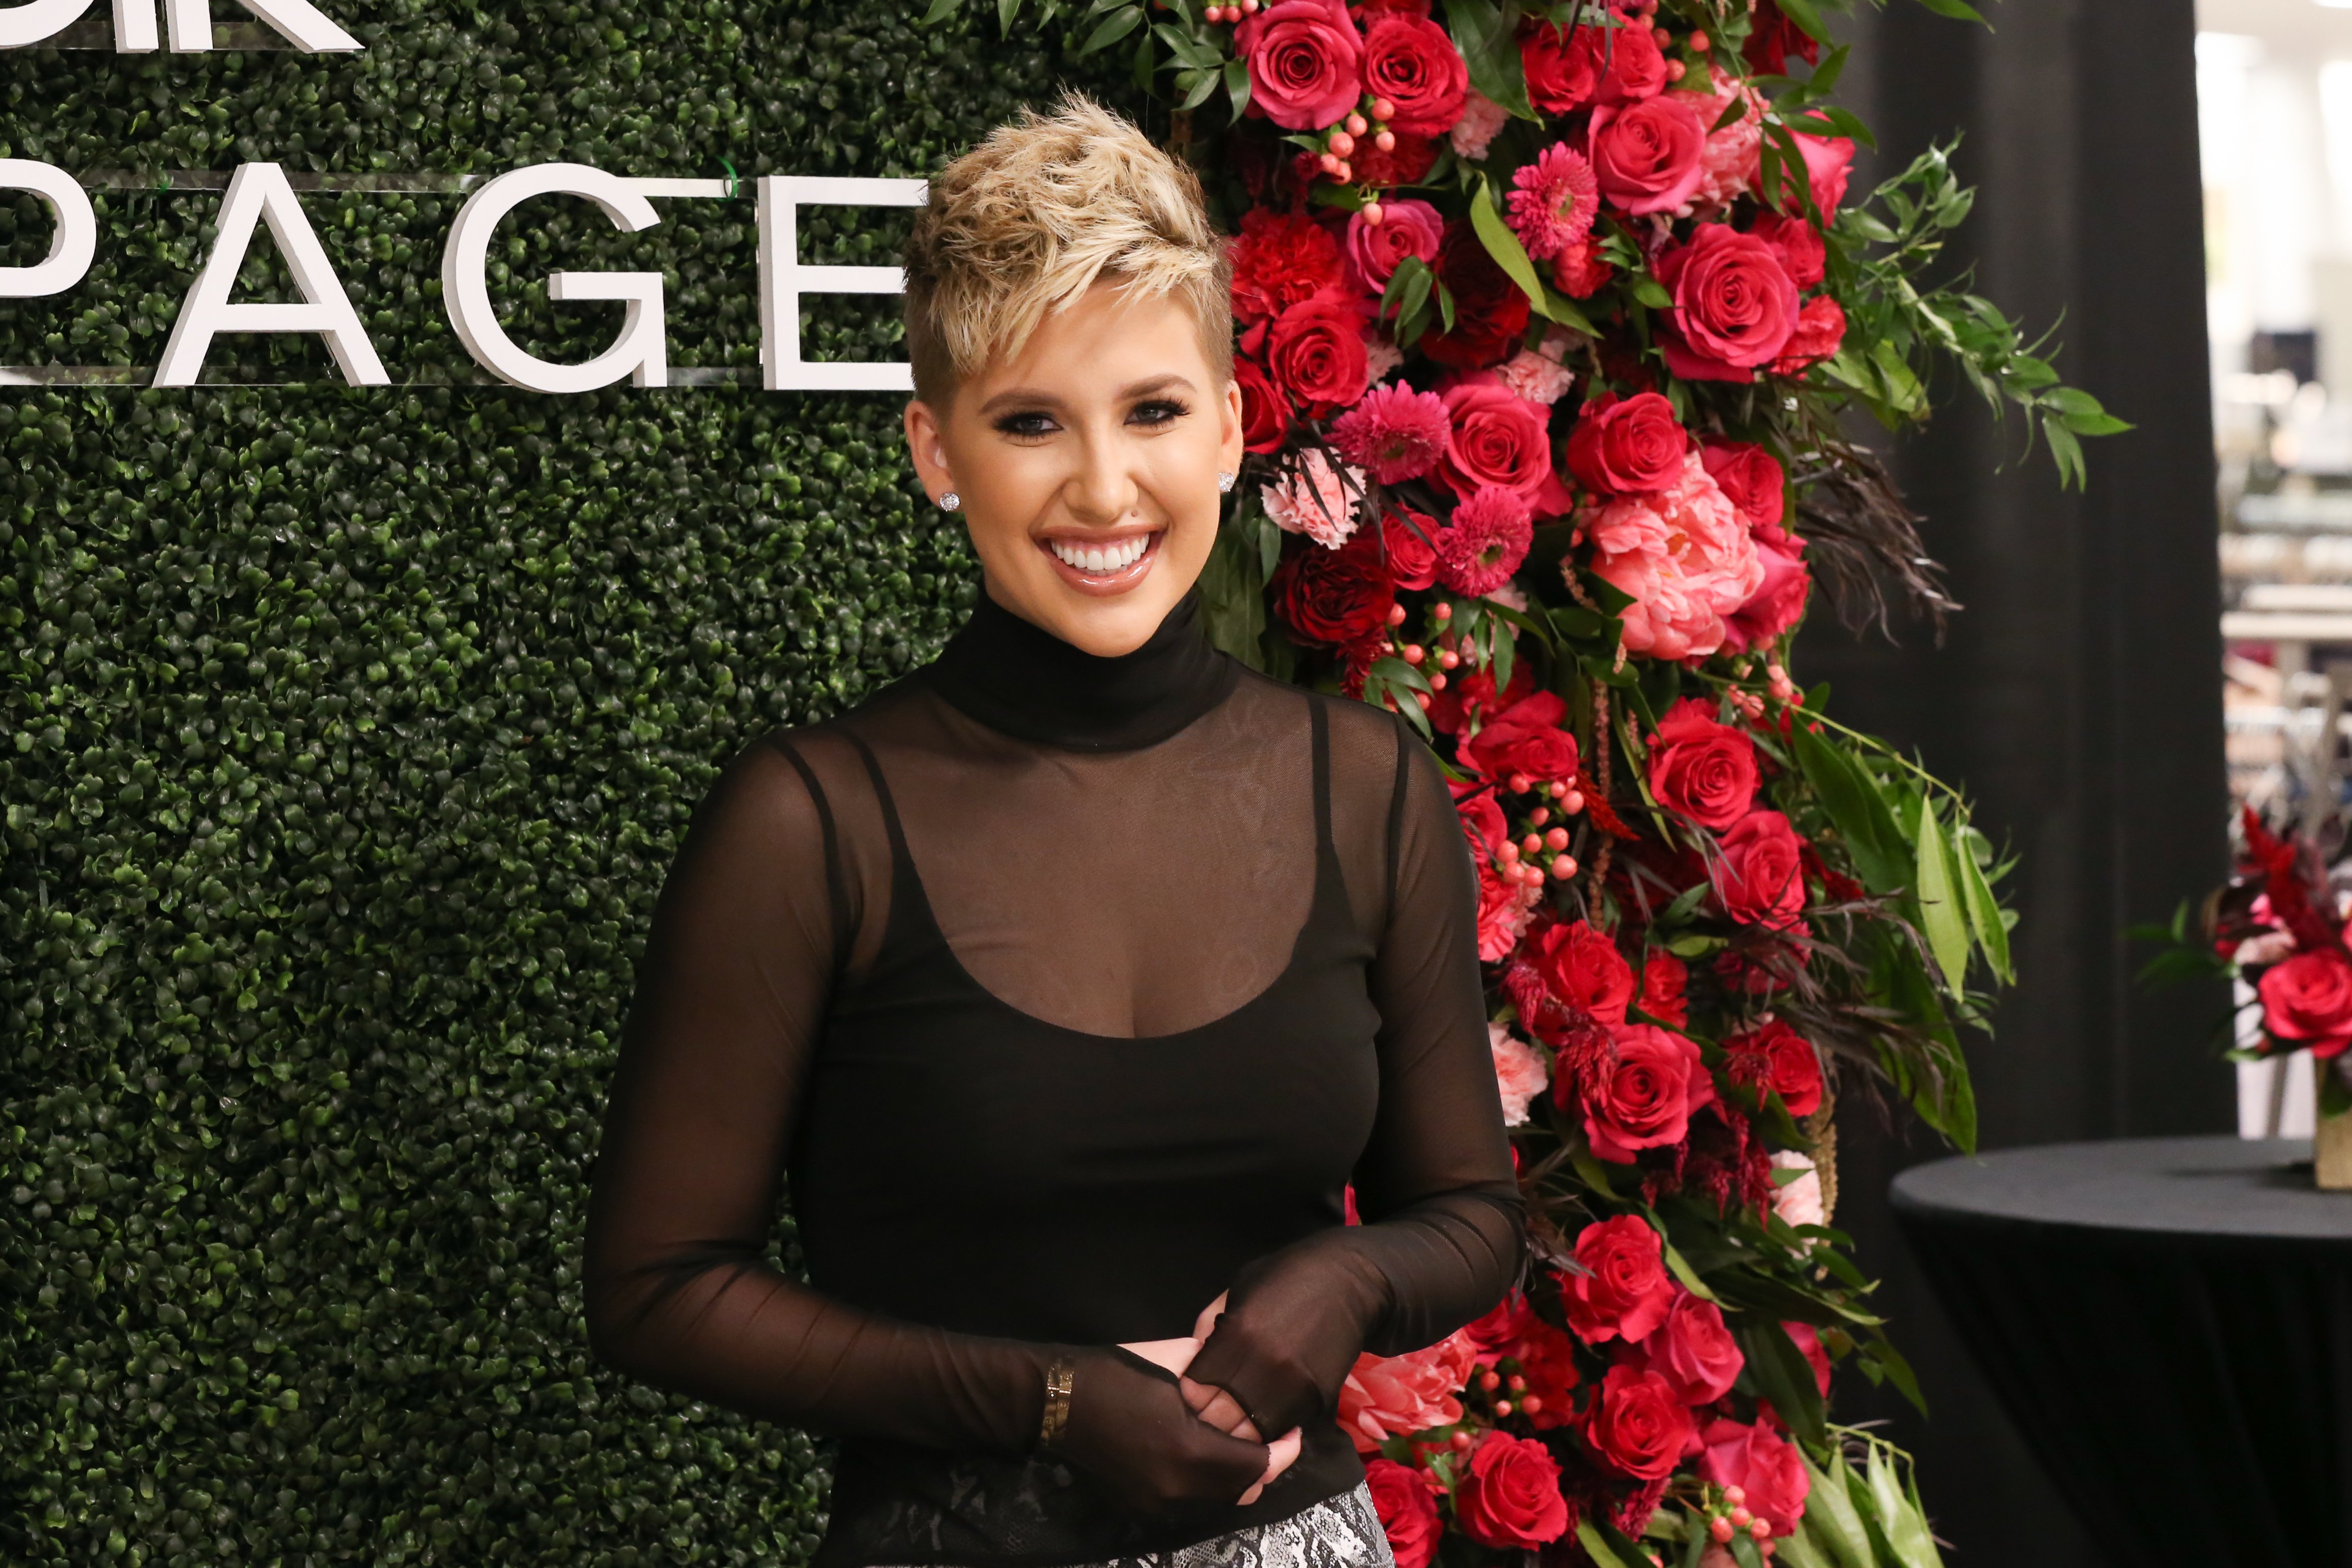  Savannah Chrisley makes a personal appearance at Belk at Cool Springs Galleria Mall on November 05, 2019 in Franklin, Tennessee. | Source: Getty Images